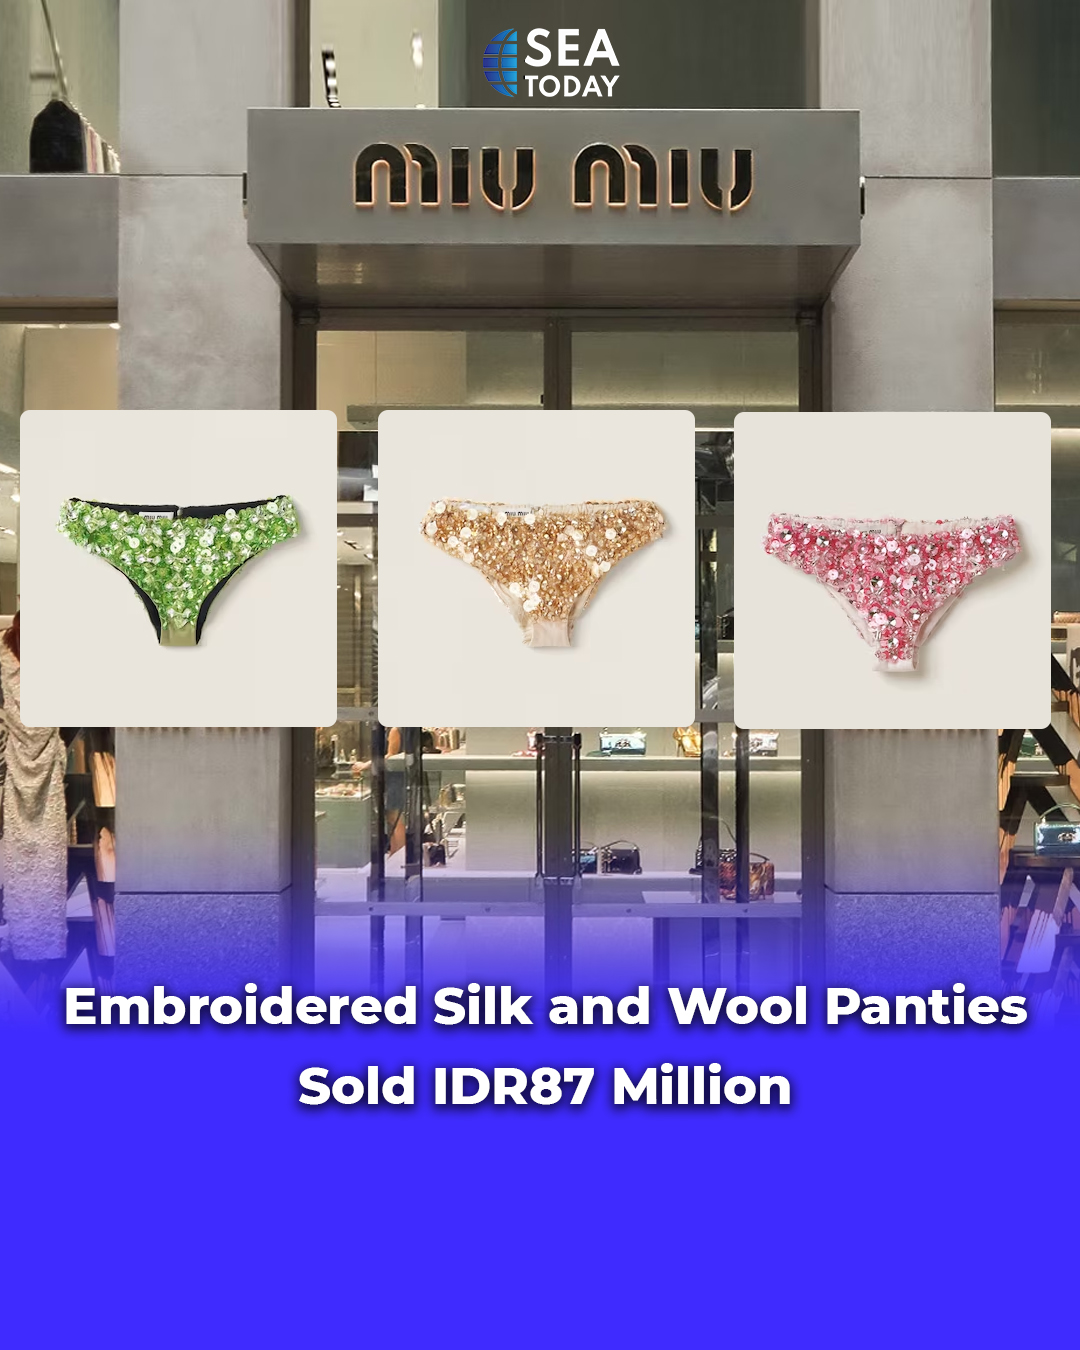 SEA Today News on X: Italian fashion house, Miu Miu has released their  newest underwear product called Embroidered Silk and Wool Panties. These  panties are made of silk, sequins, and wool that